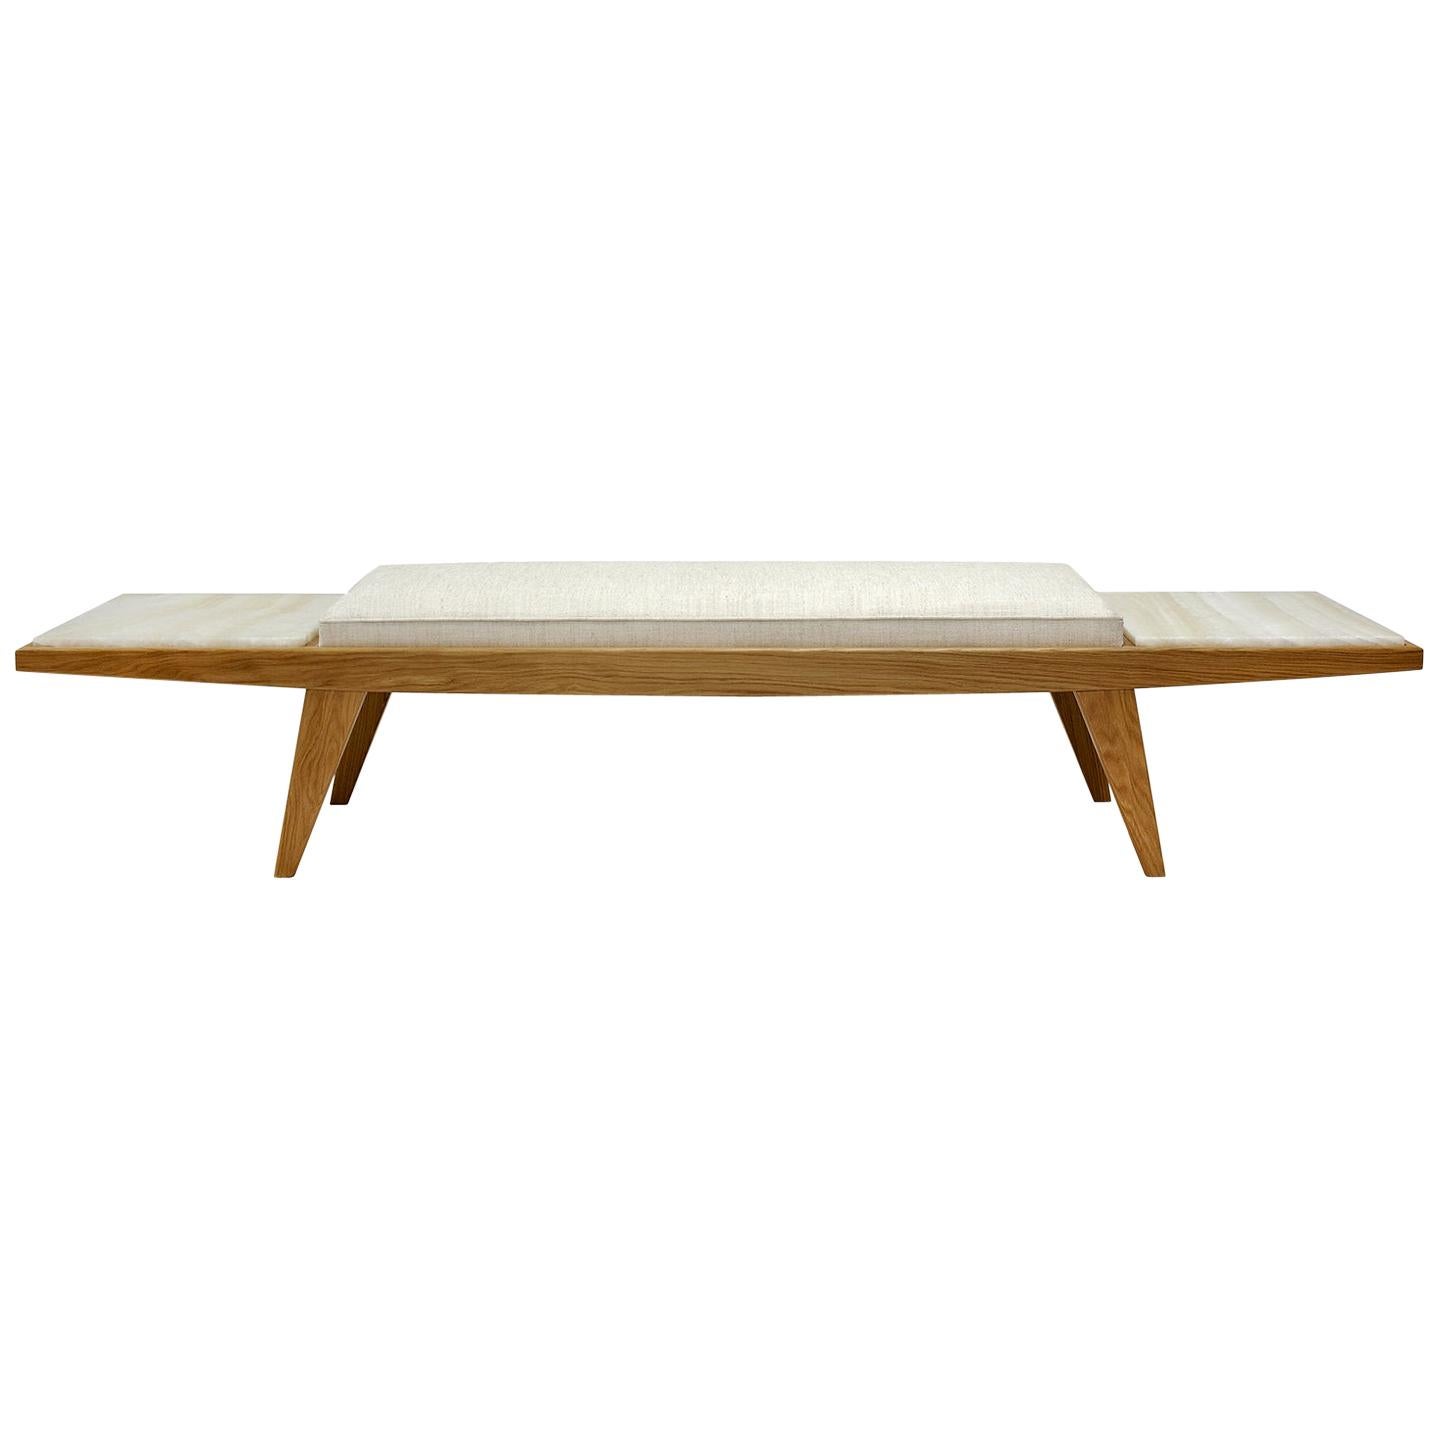 Contemporary Handcrafted Bench "Aenos" in Wood and Marble Base by Anaktae